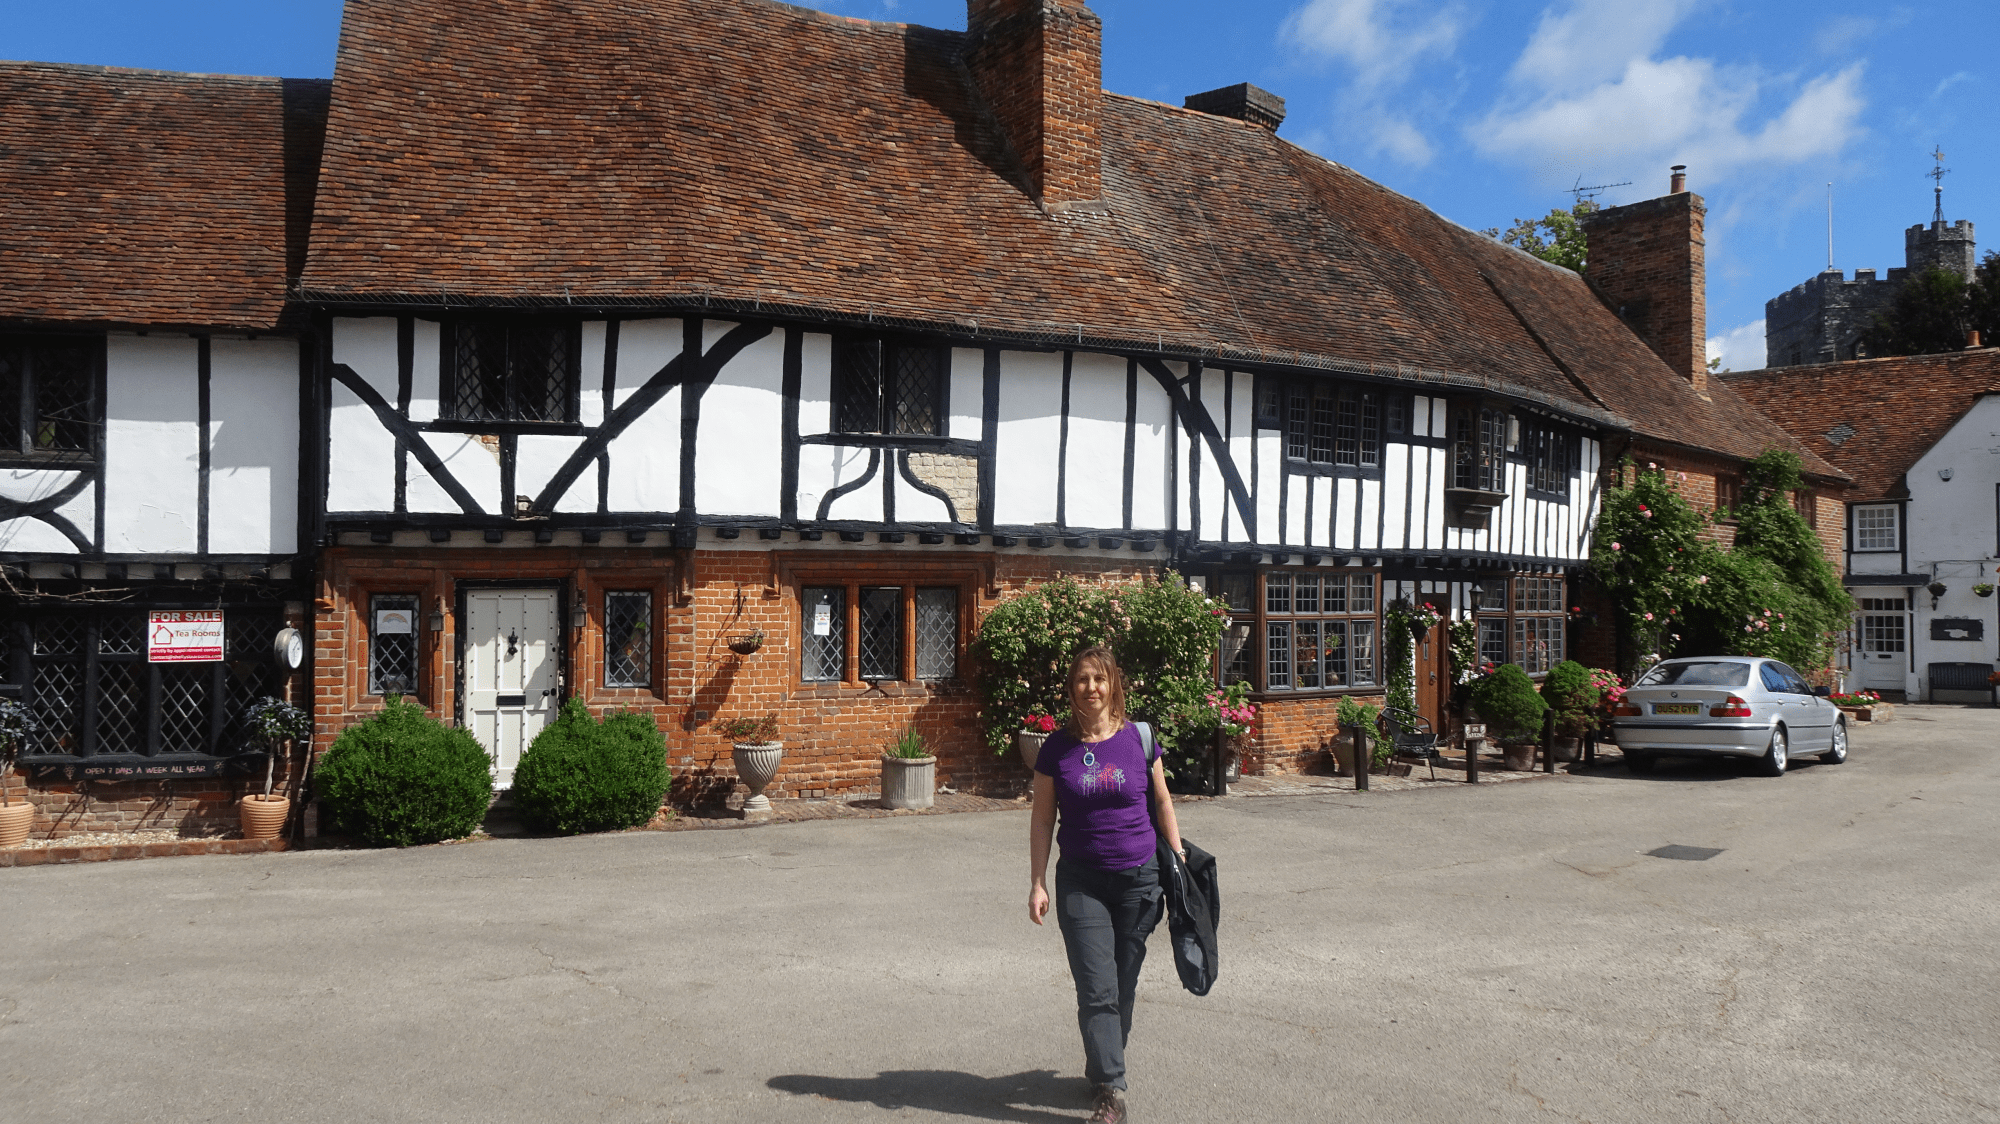 Chilham village street, old timber framed buildings on a sunny day. Person walking towards camera.